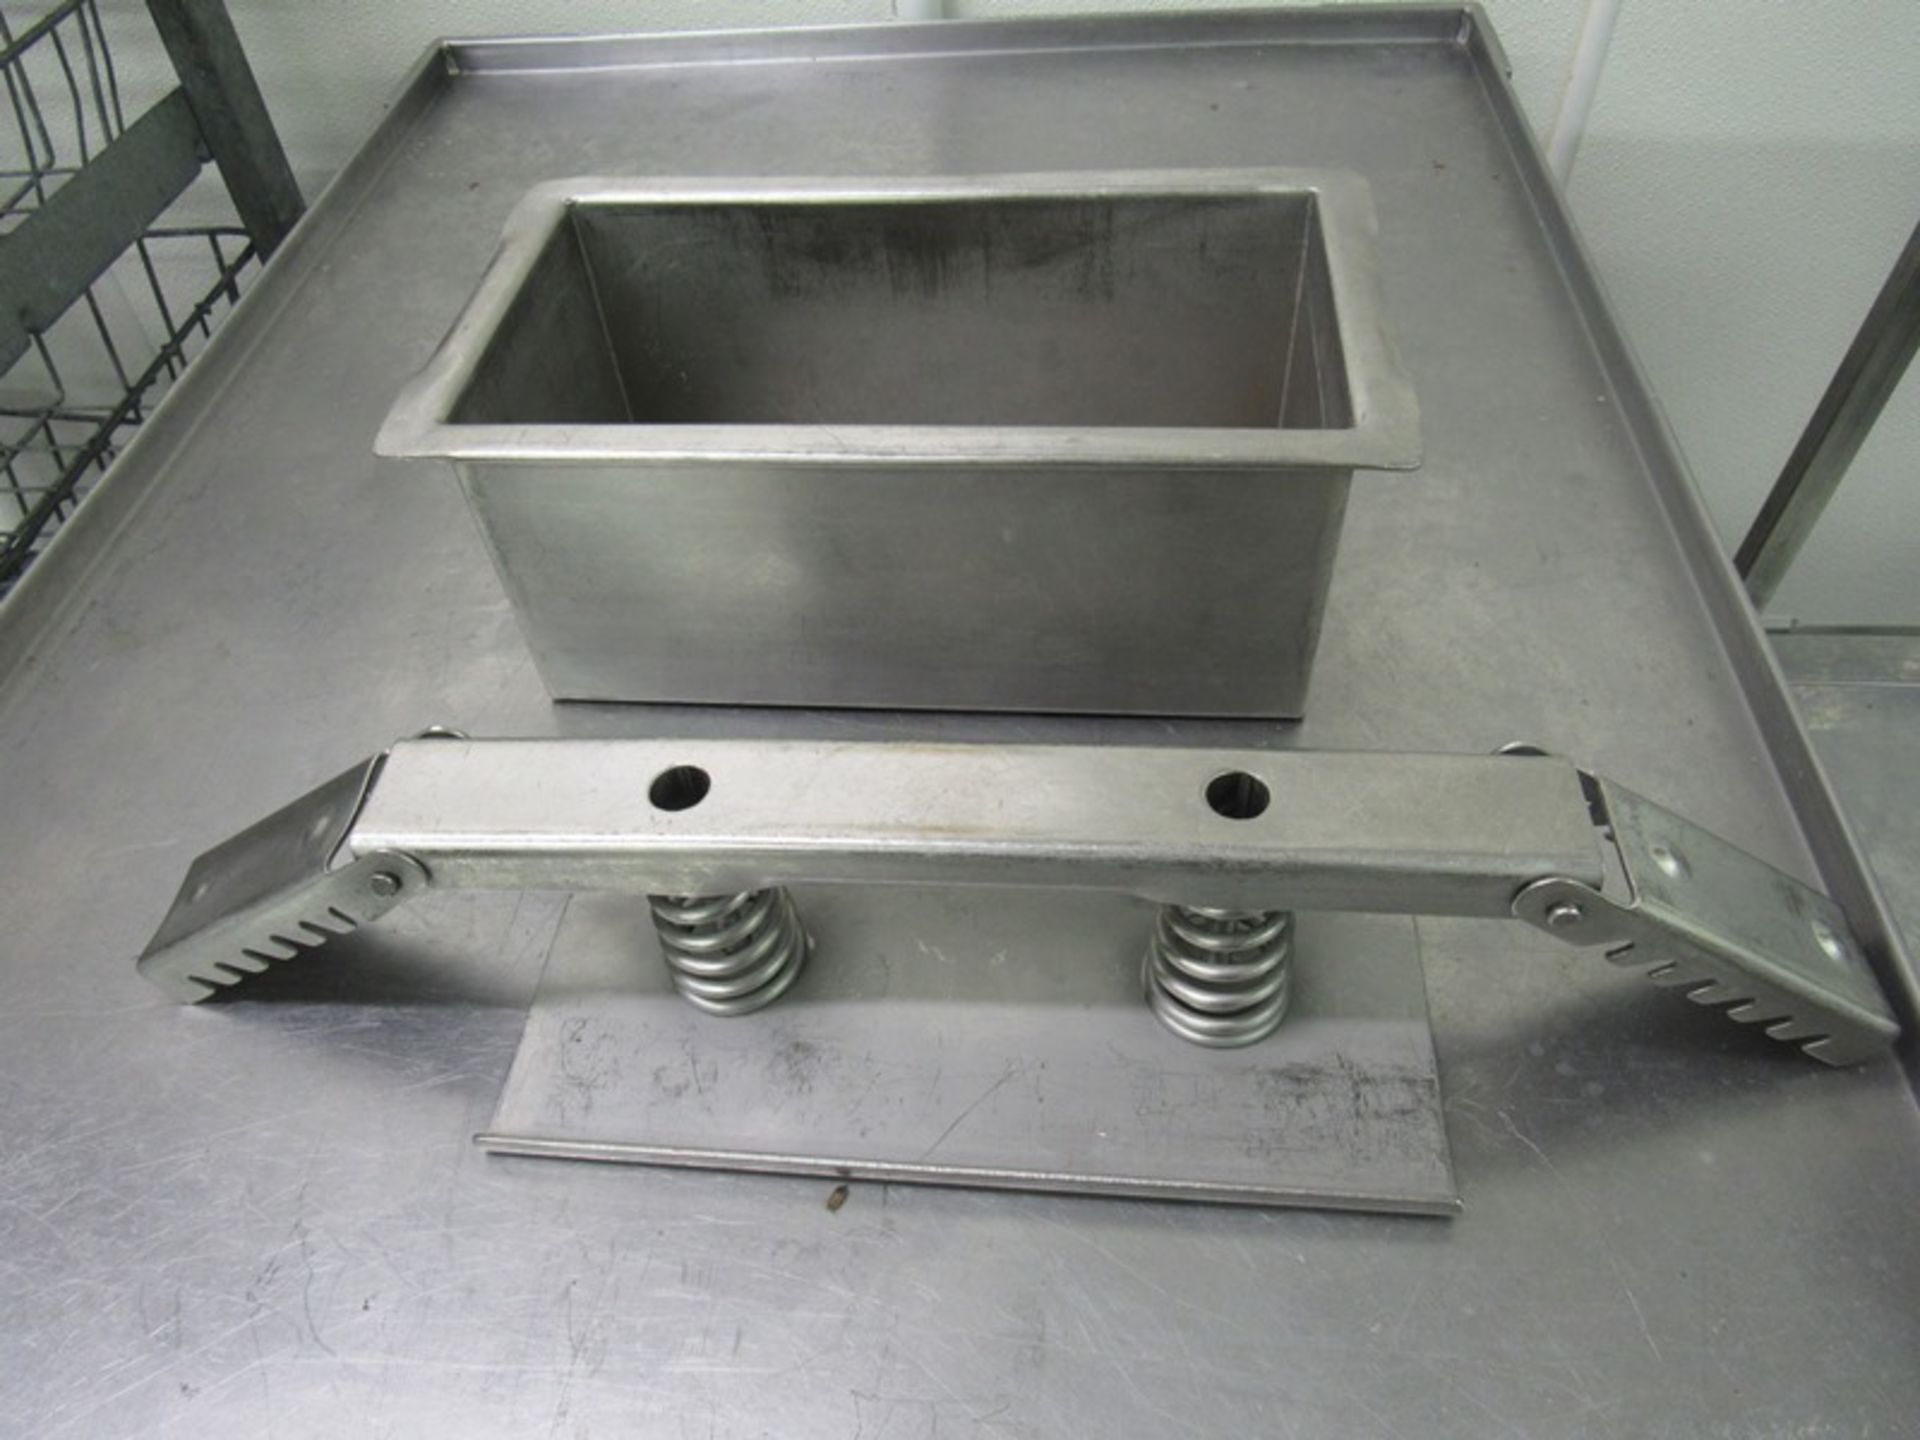 Stainless Steel Molds with spring loaded lids, 5 1/2" W X 11" L X 4 1/2" D (All Funds Must Be Receiv - Image 4 of 5